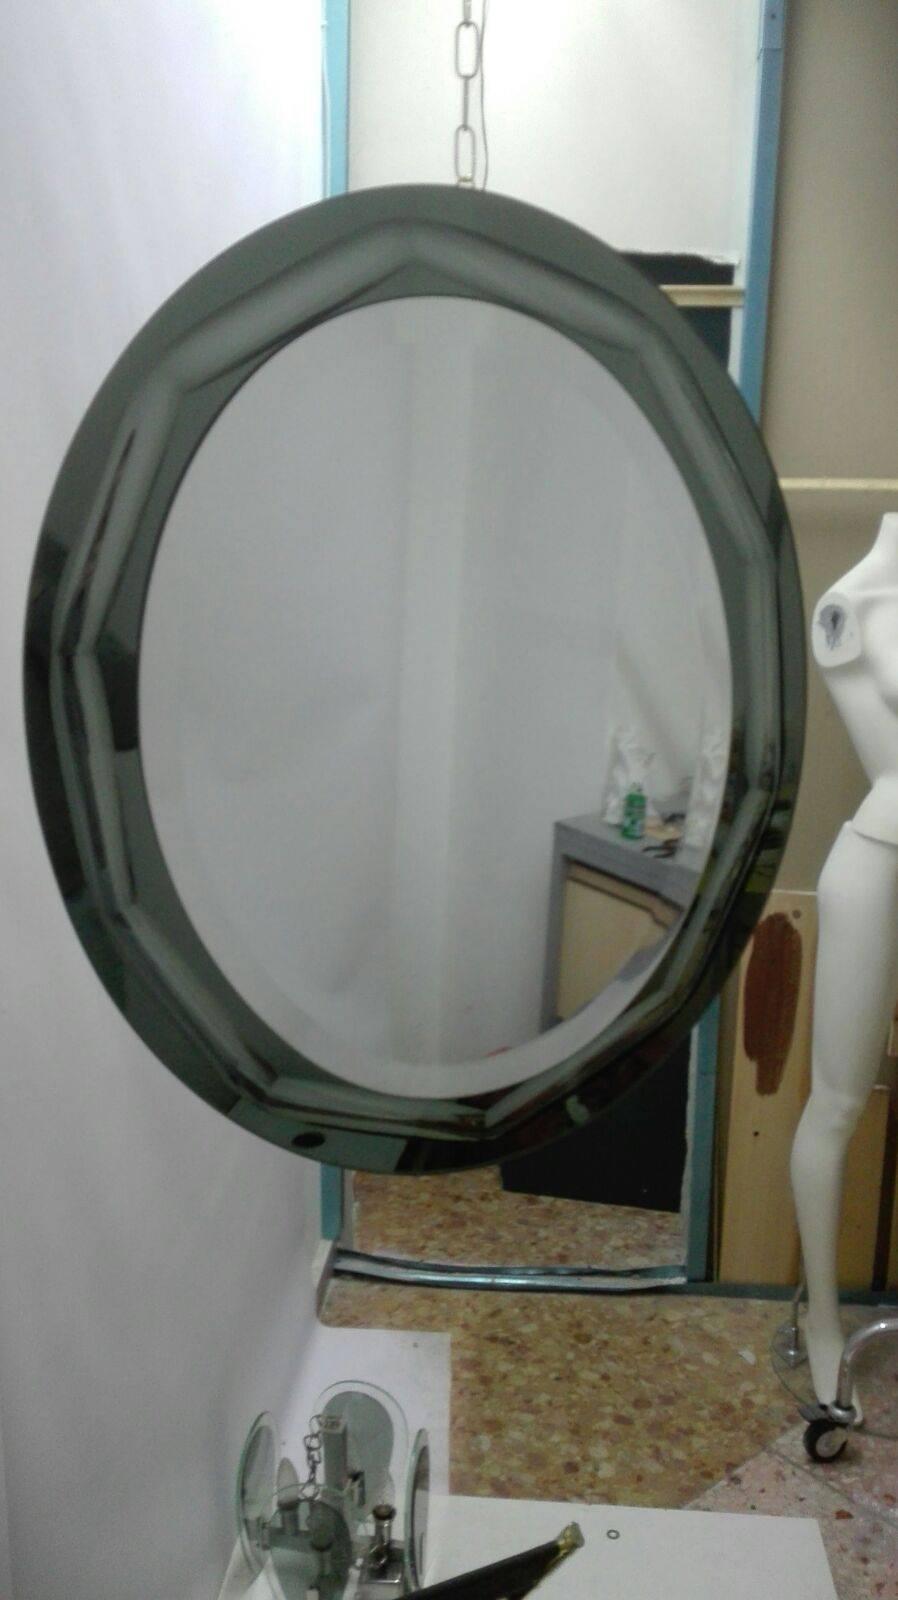 Mirror, Antonio Lupi. Vintage Italian oval, all glass mirror crystal Wolves Luxor (Antonio Lupi). The main dish bevelled glass is mounted on a smoked oval frame silver colored glass. It can be hung horizontally or vertically.